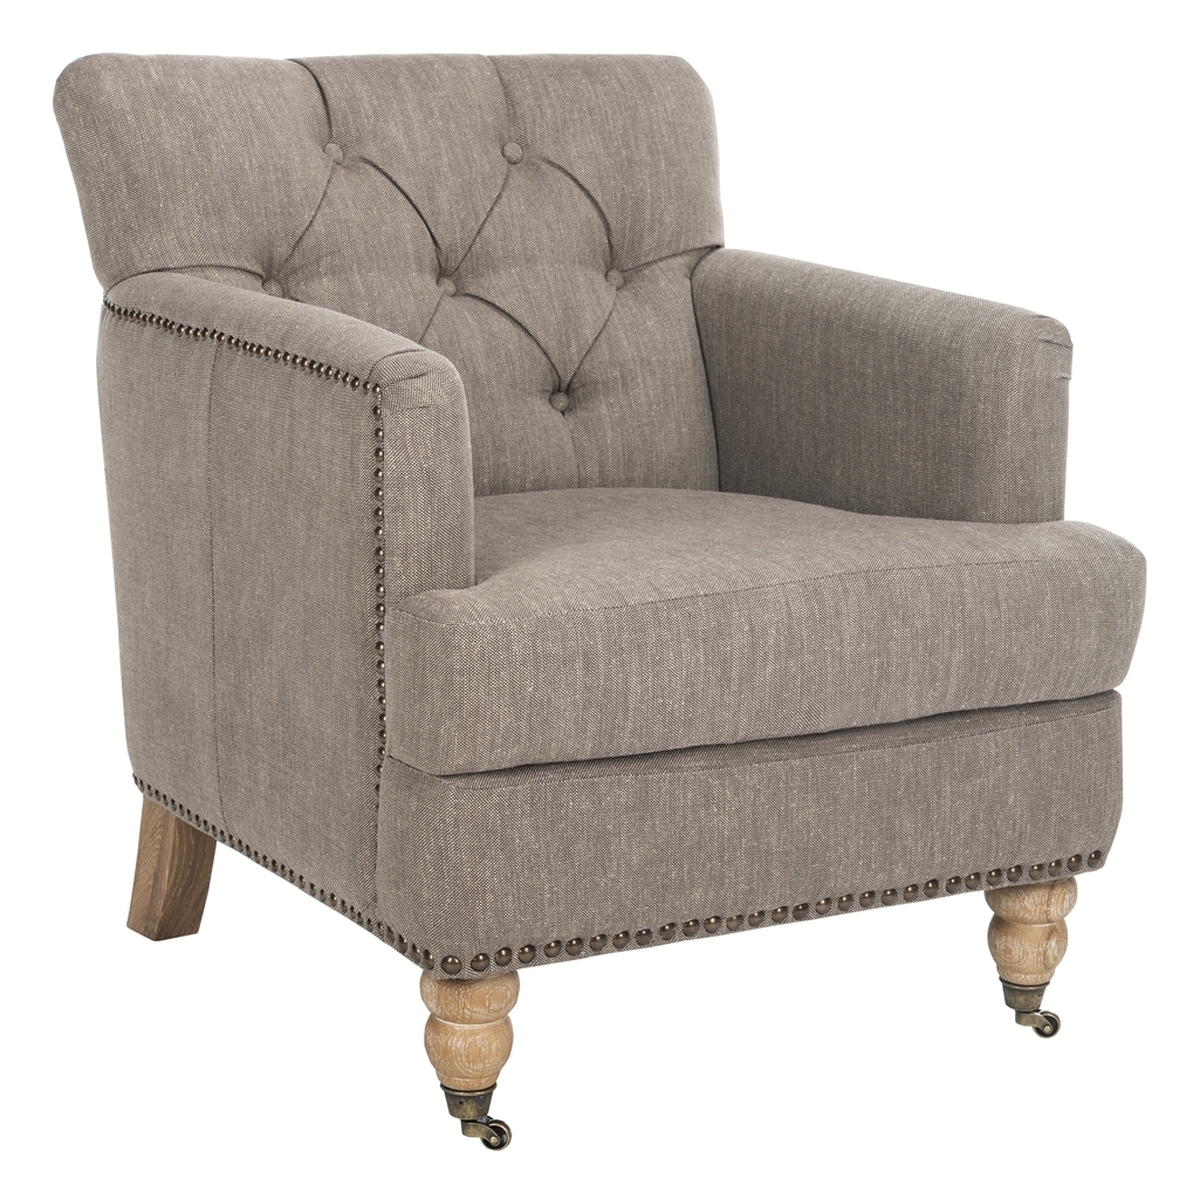 Colin Tufted Club Chair - Taupe/White Wash - Arlo Home - Image 2